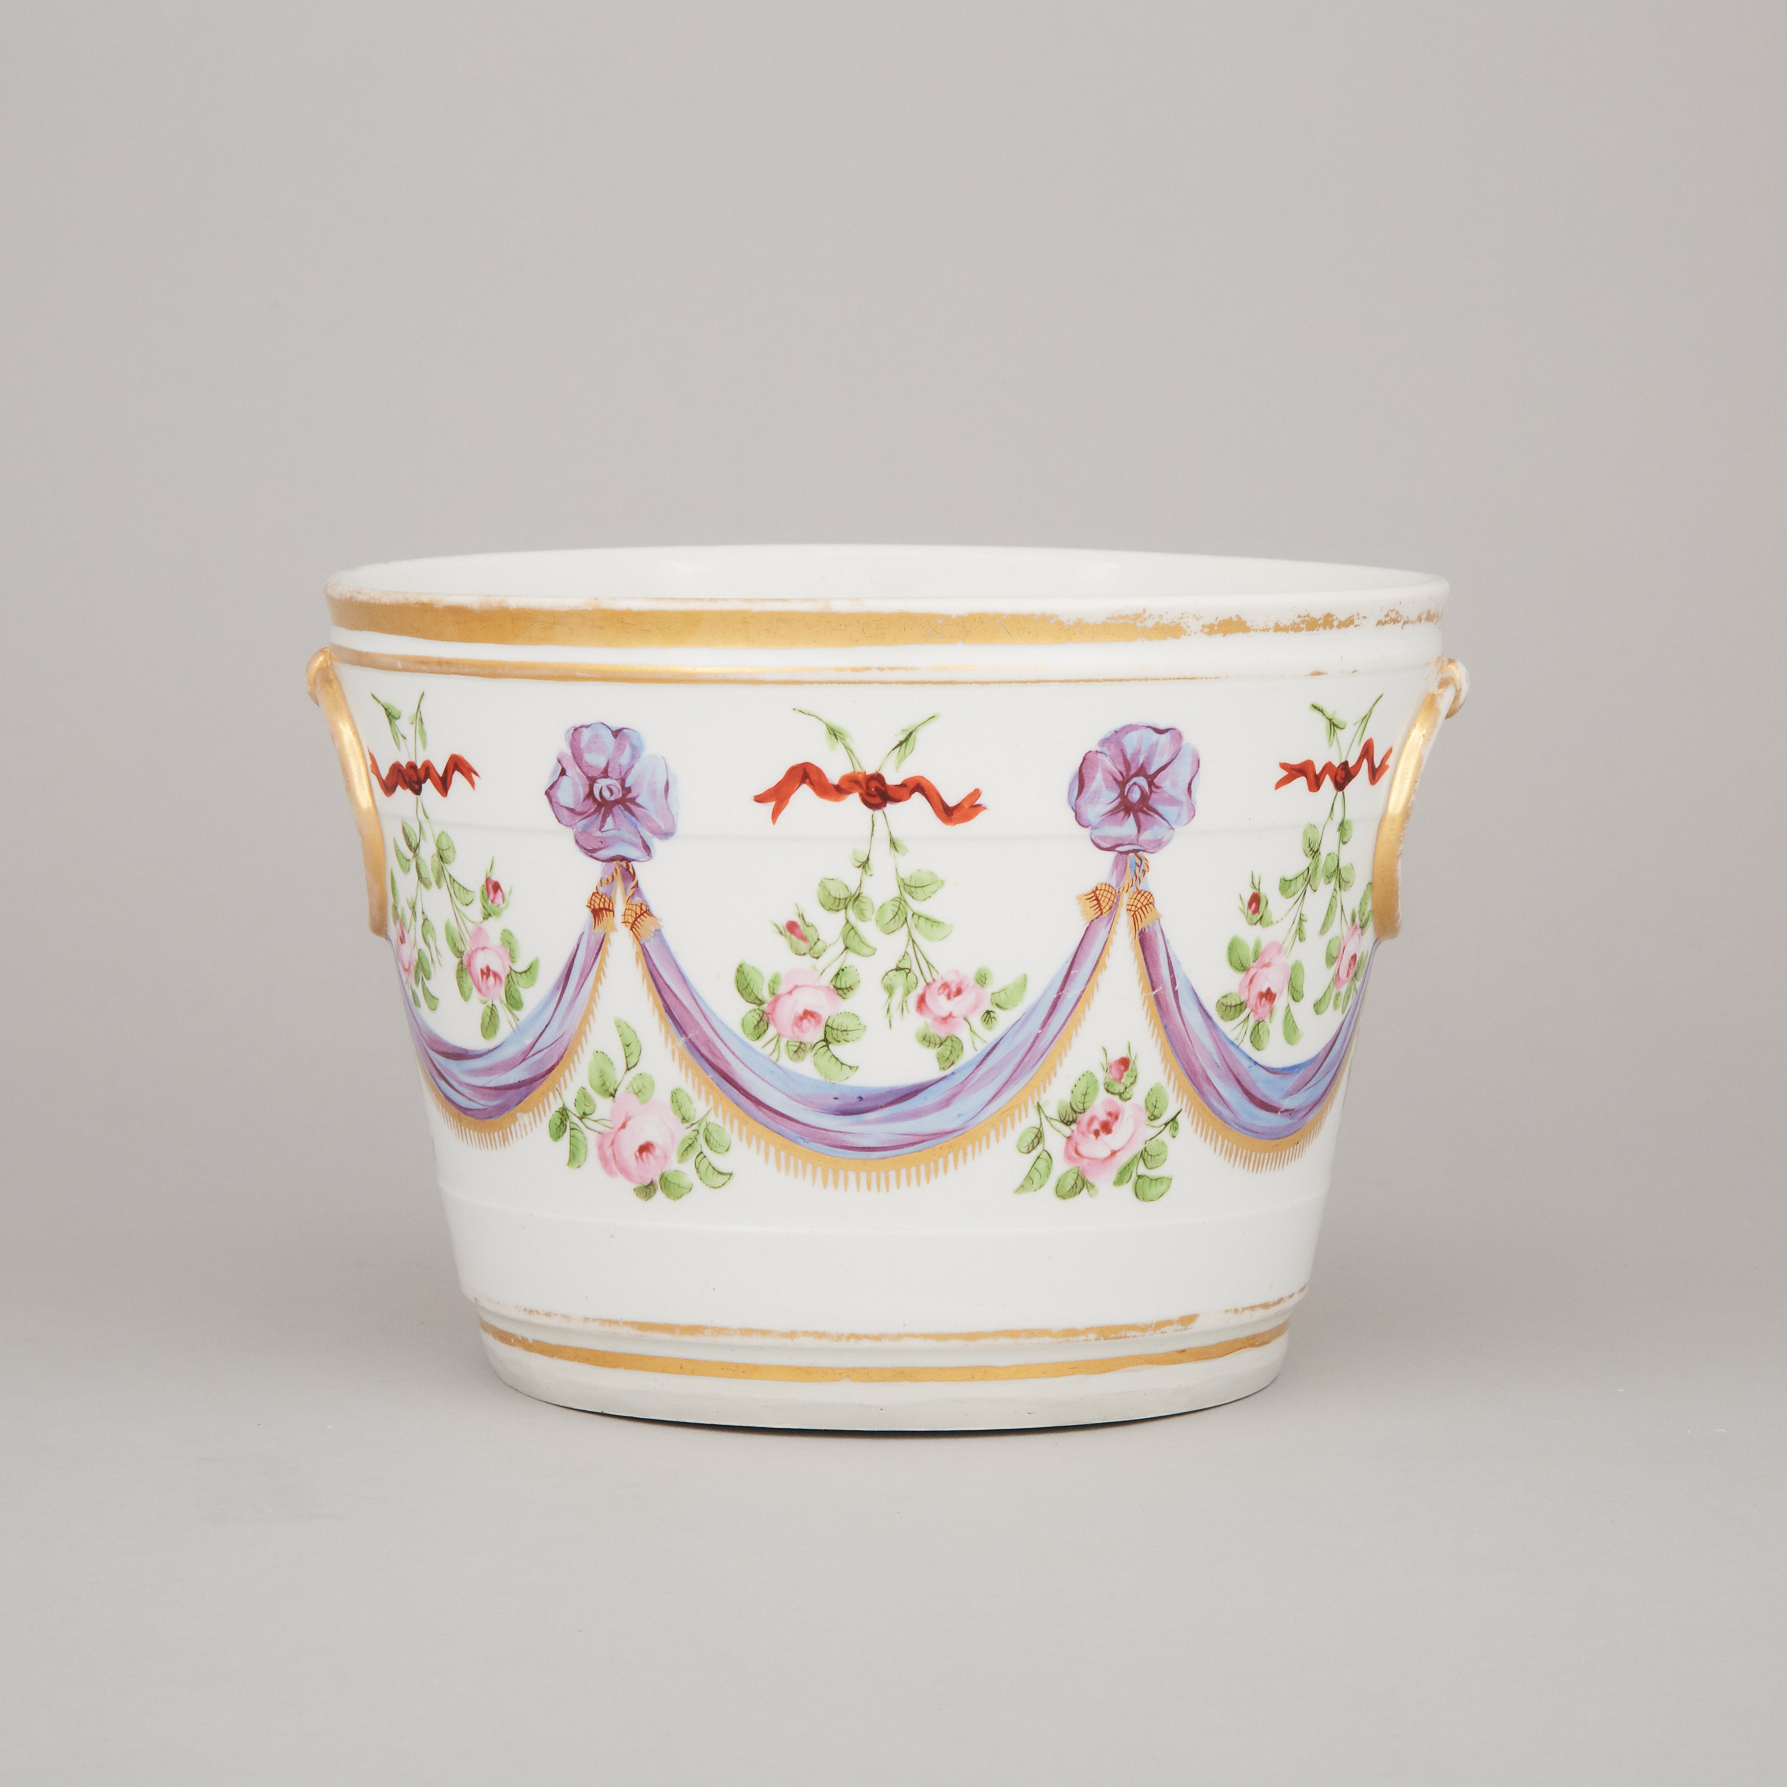 English Porcelain Large Cachepot, early 19th century